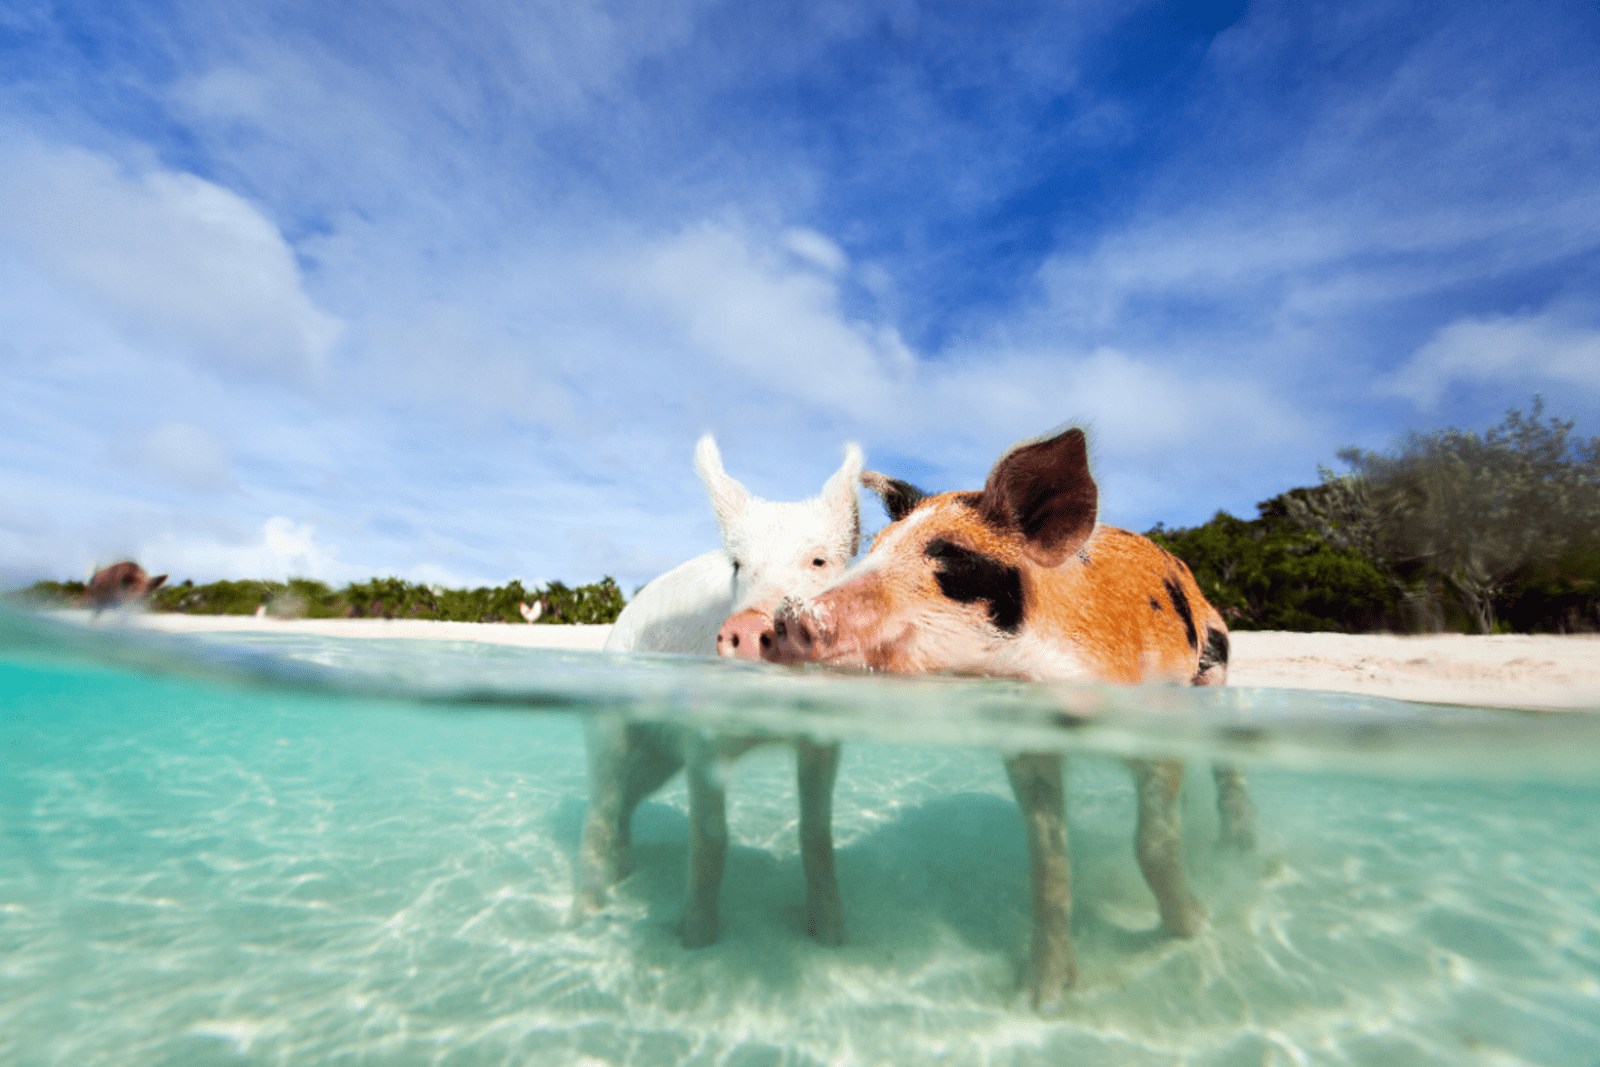 Pig Beach is a popular attraction in The Bahamas